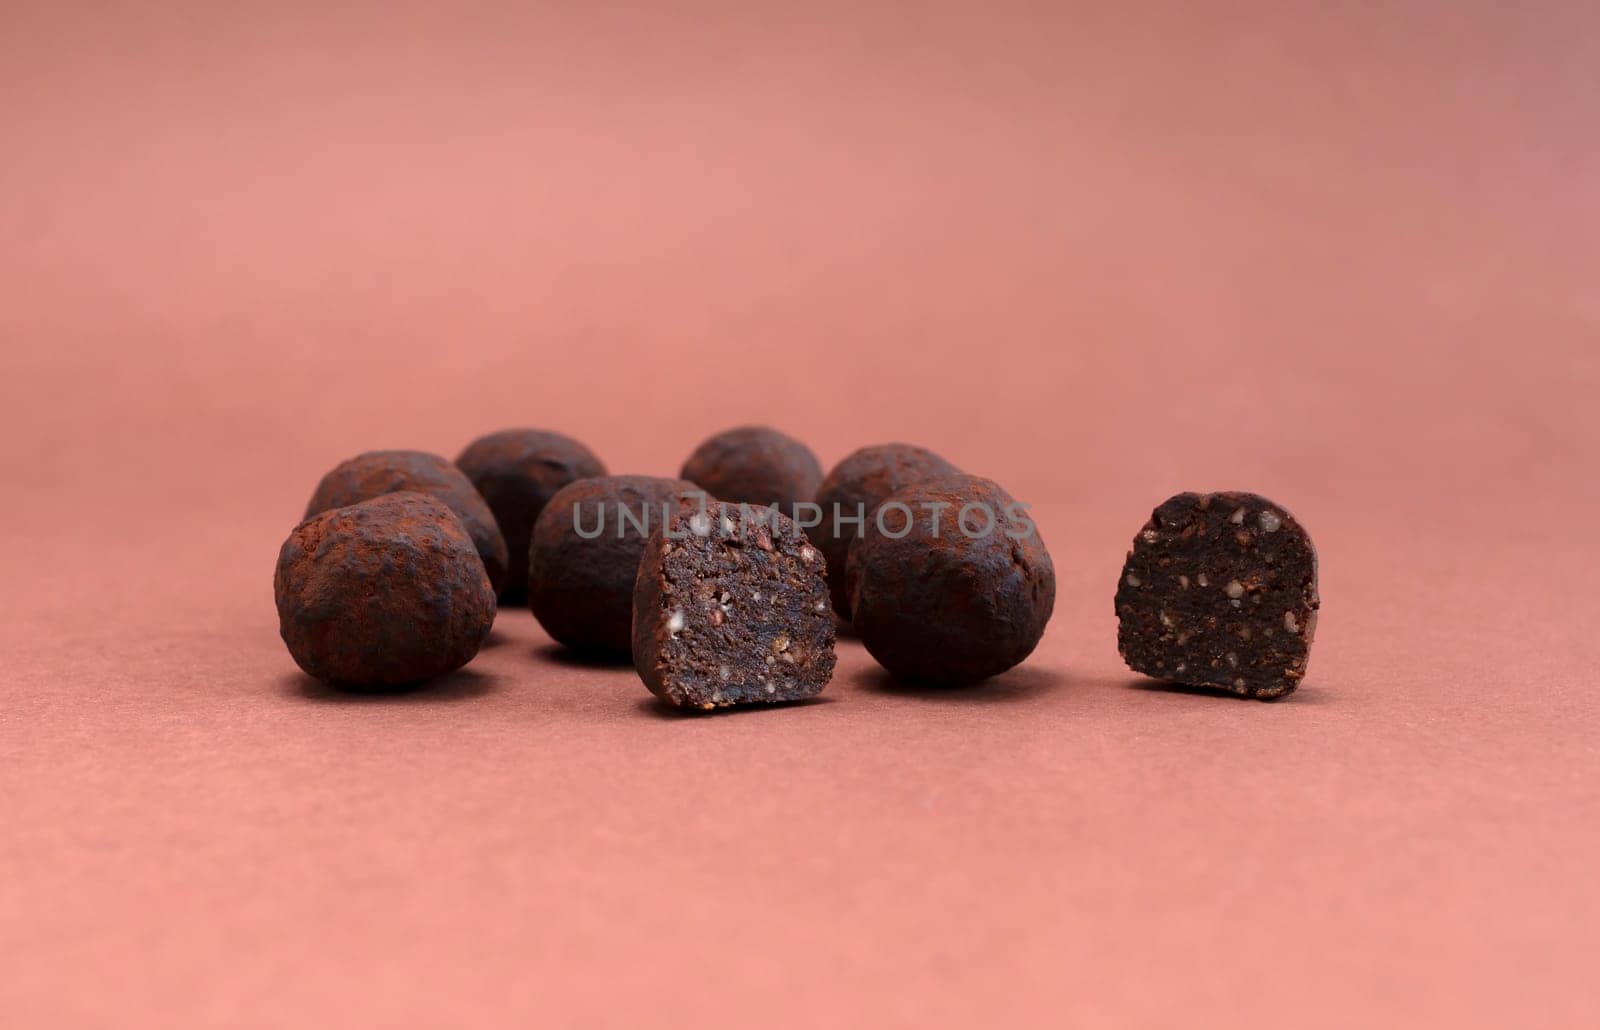 Vegan Raw Sweet Balls made of Organic Cocoa beans With Dry Citrus Fruits on Brown Background. Cop Space. Mockup Horizontal Plane. Healthy Food, Dessert by netatsi